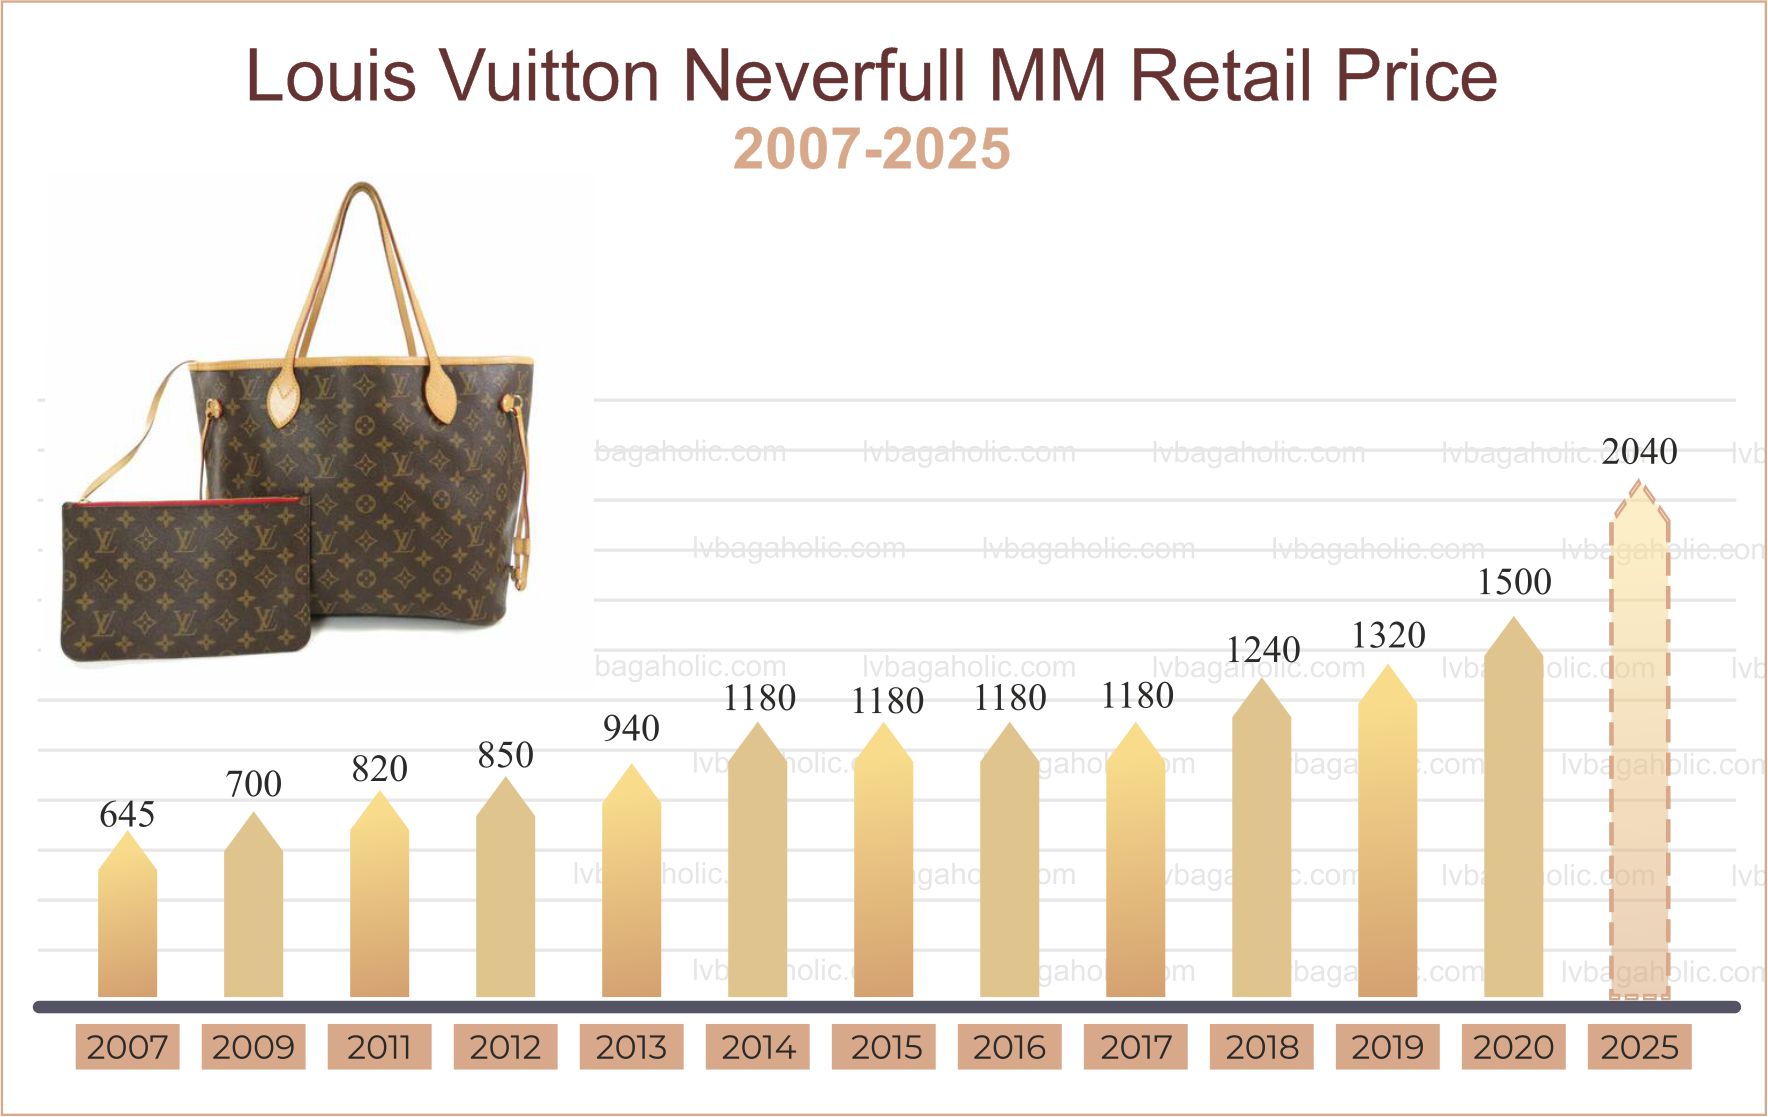 Louis Vuitton price increase in 2017